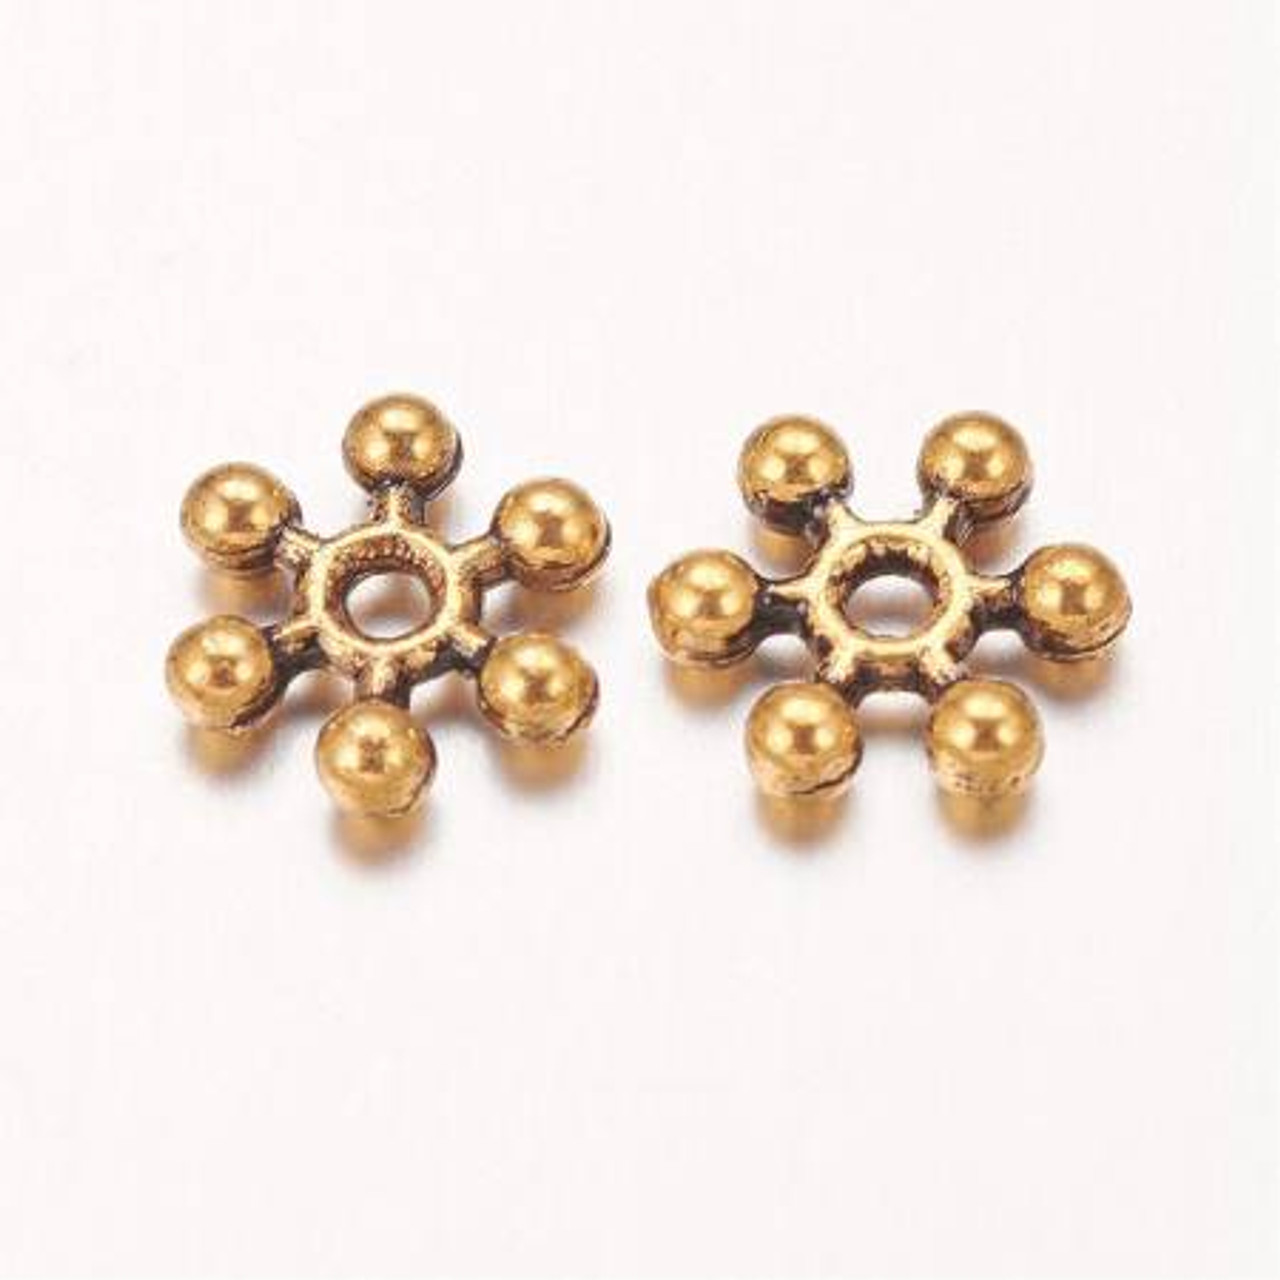 TIBETAN STYLE SNOWFLAKE BEAD SPACERS Antique Bronze Plated 8mm (Pack of 50)